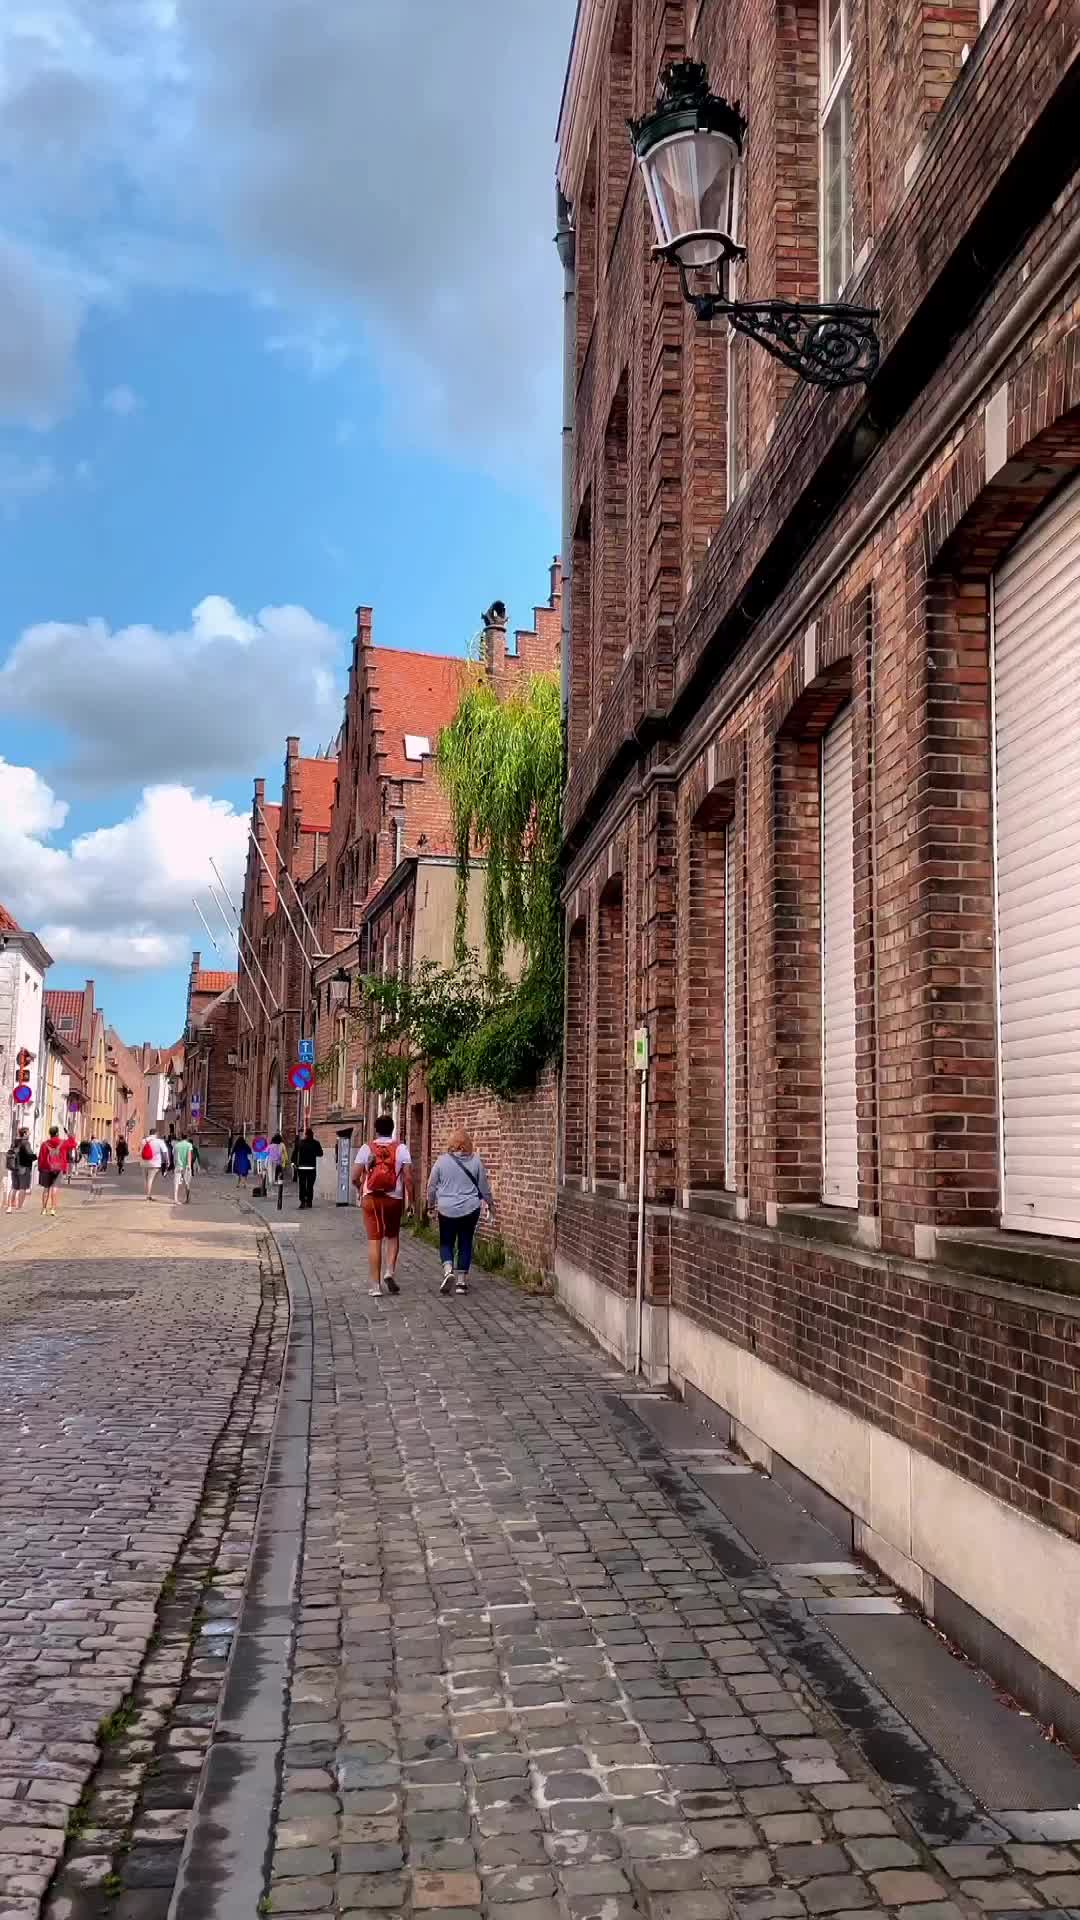 Charming Bruges: A Rainy Day Adventure